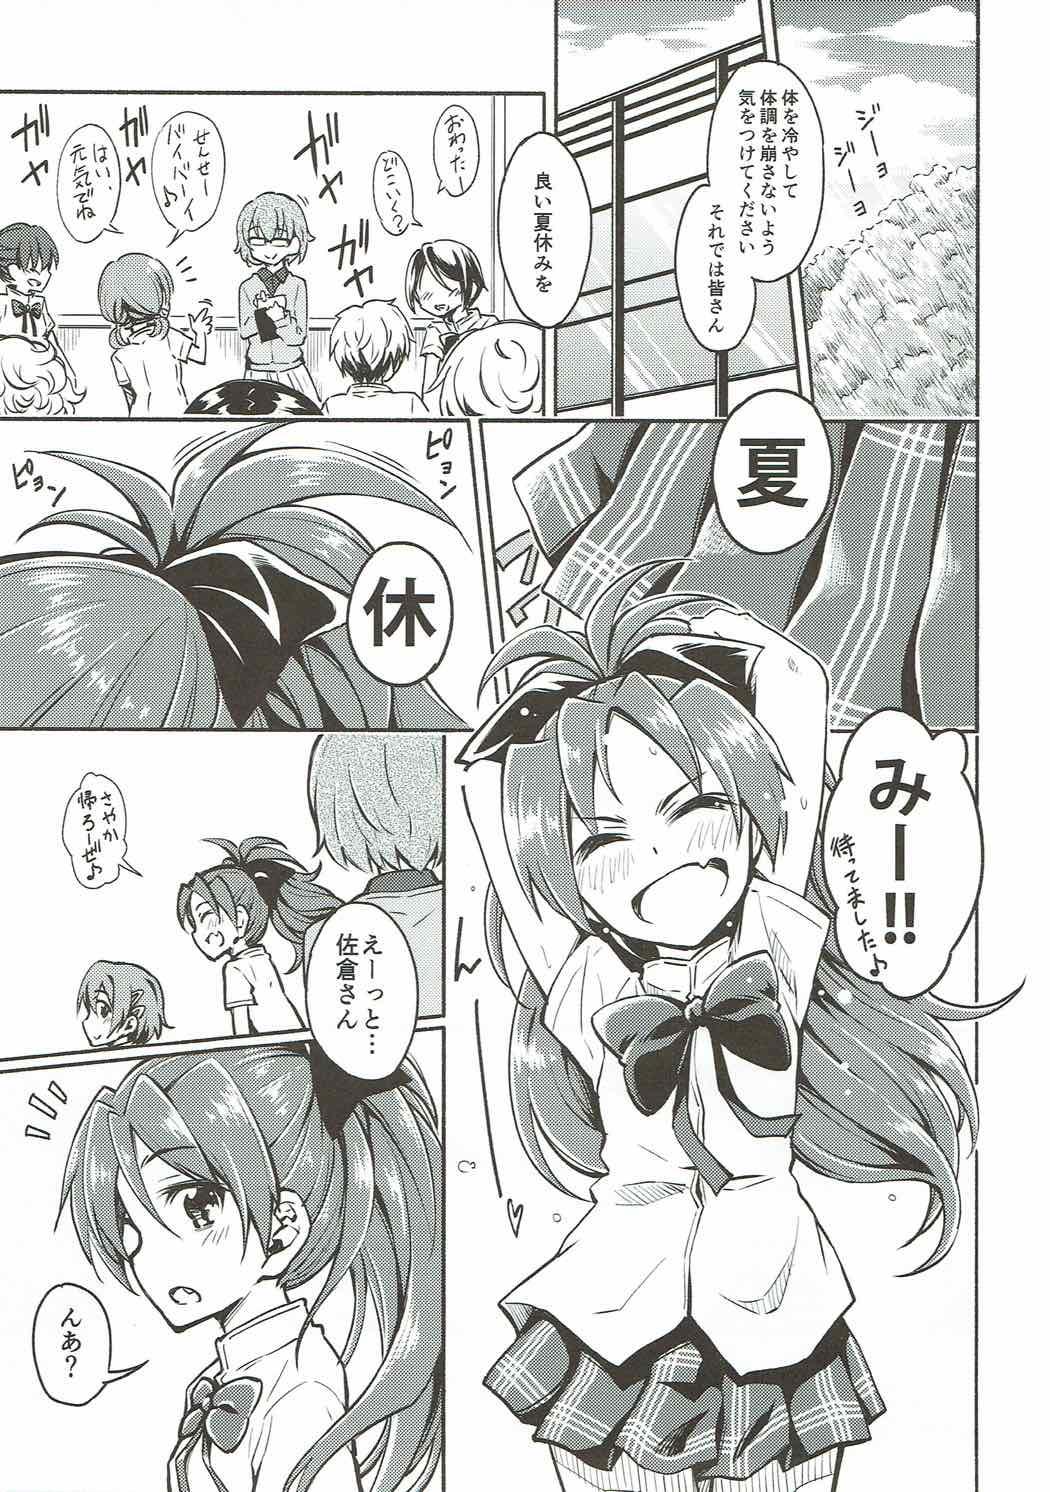 For Lovely Girls' Lily Vol. 13 - Puella magi madoka magica Suckingcock - Page 4